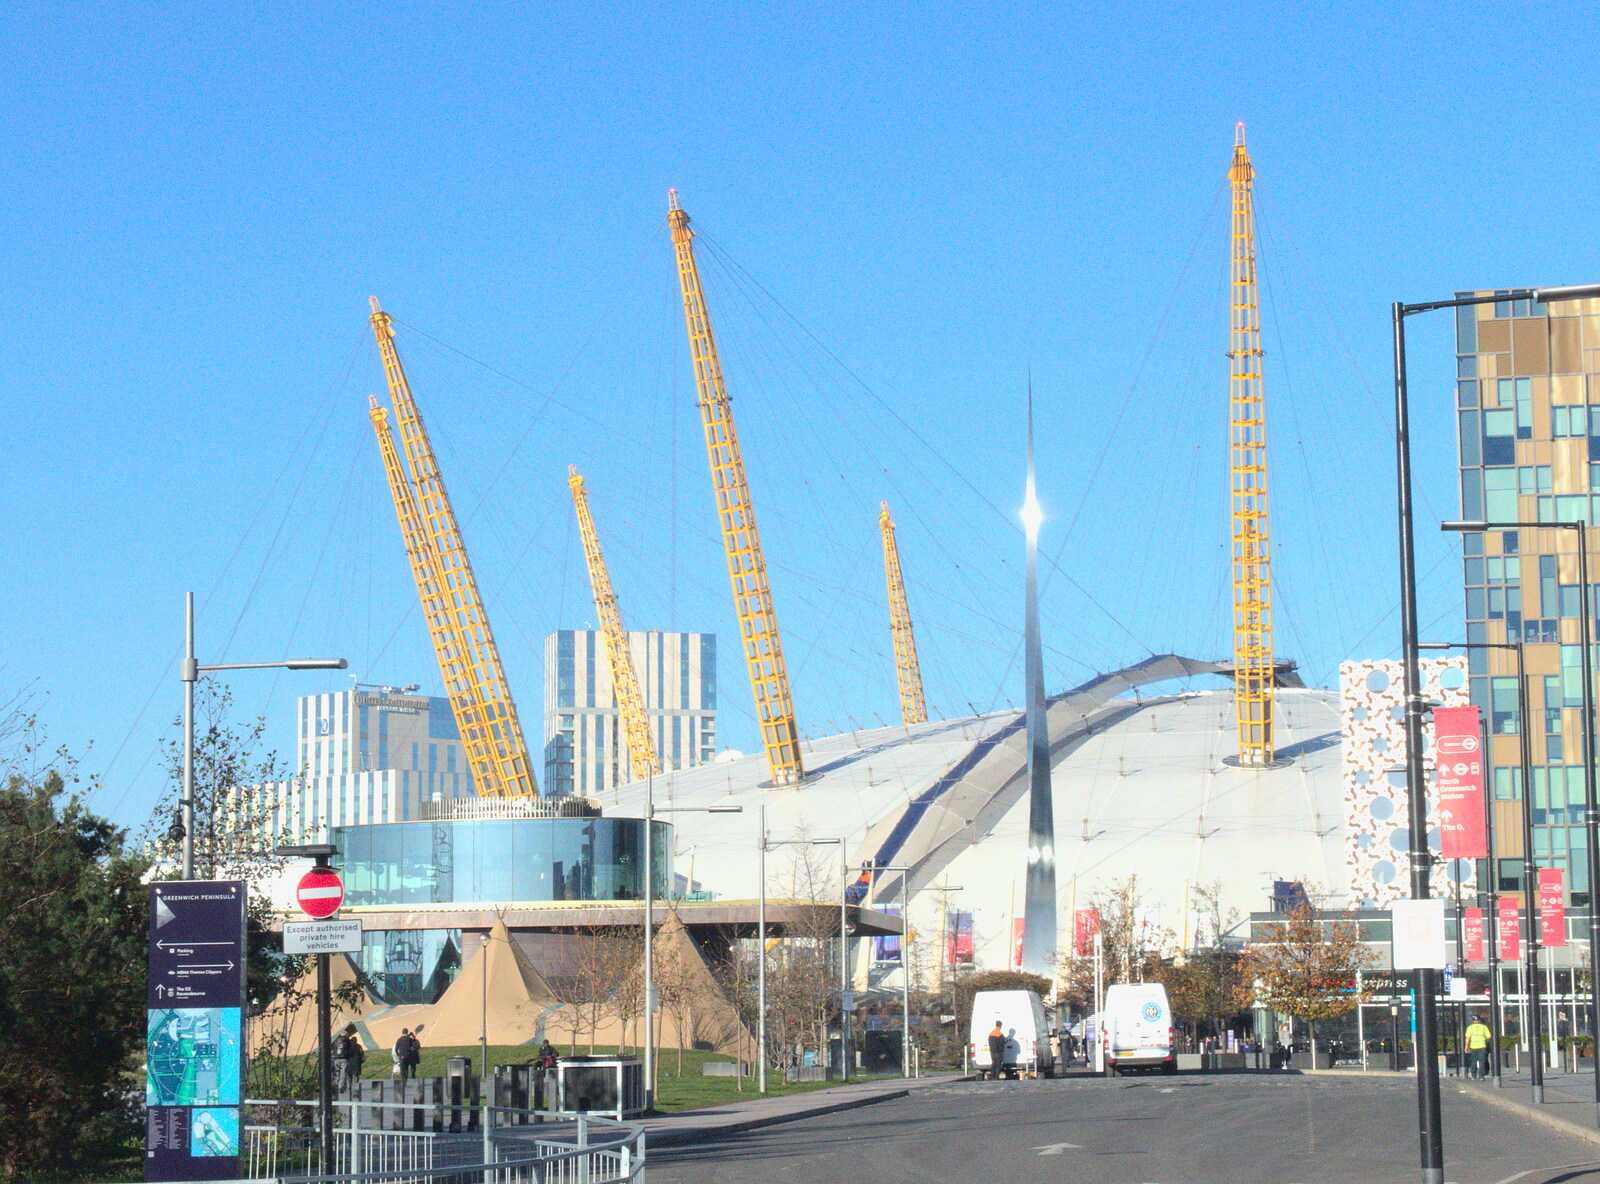 The O2 in Greenwich from SwiftKey Does Laser Tag, Charlton and Greenwich, London - 29th November 2016